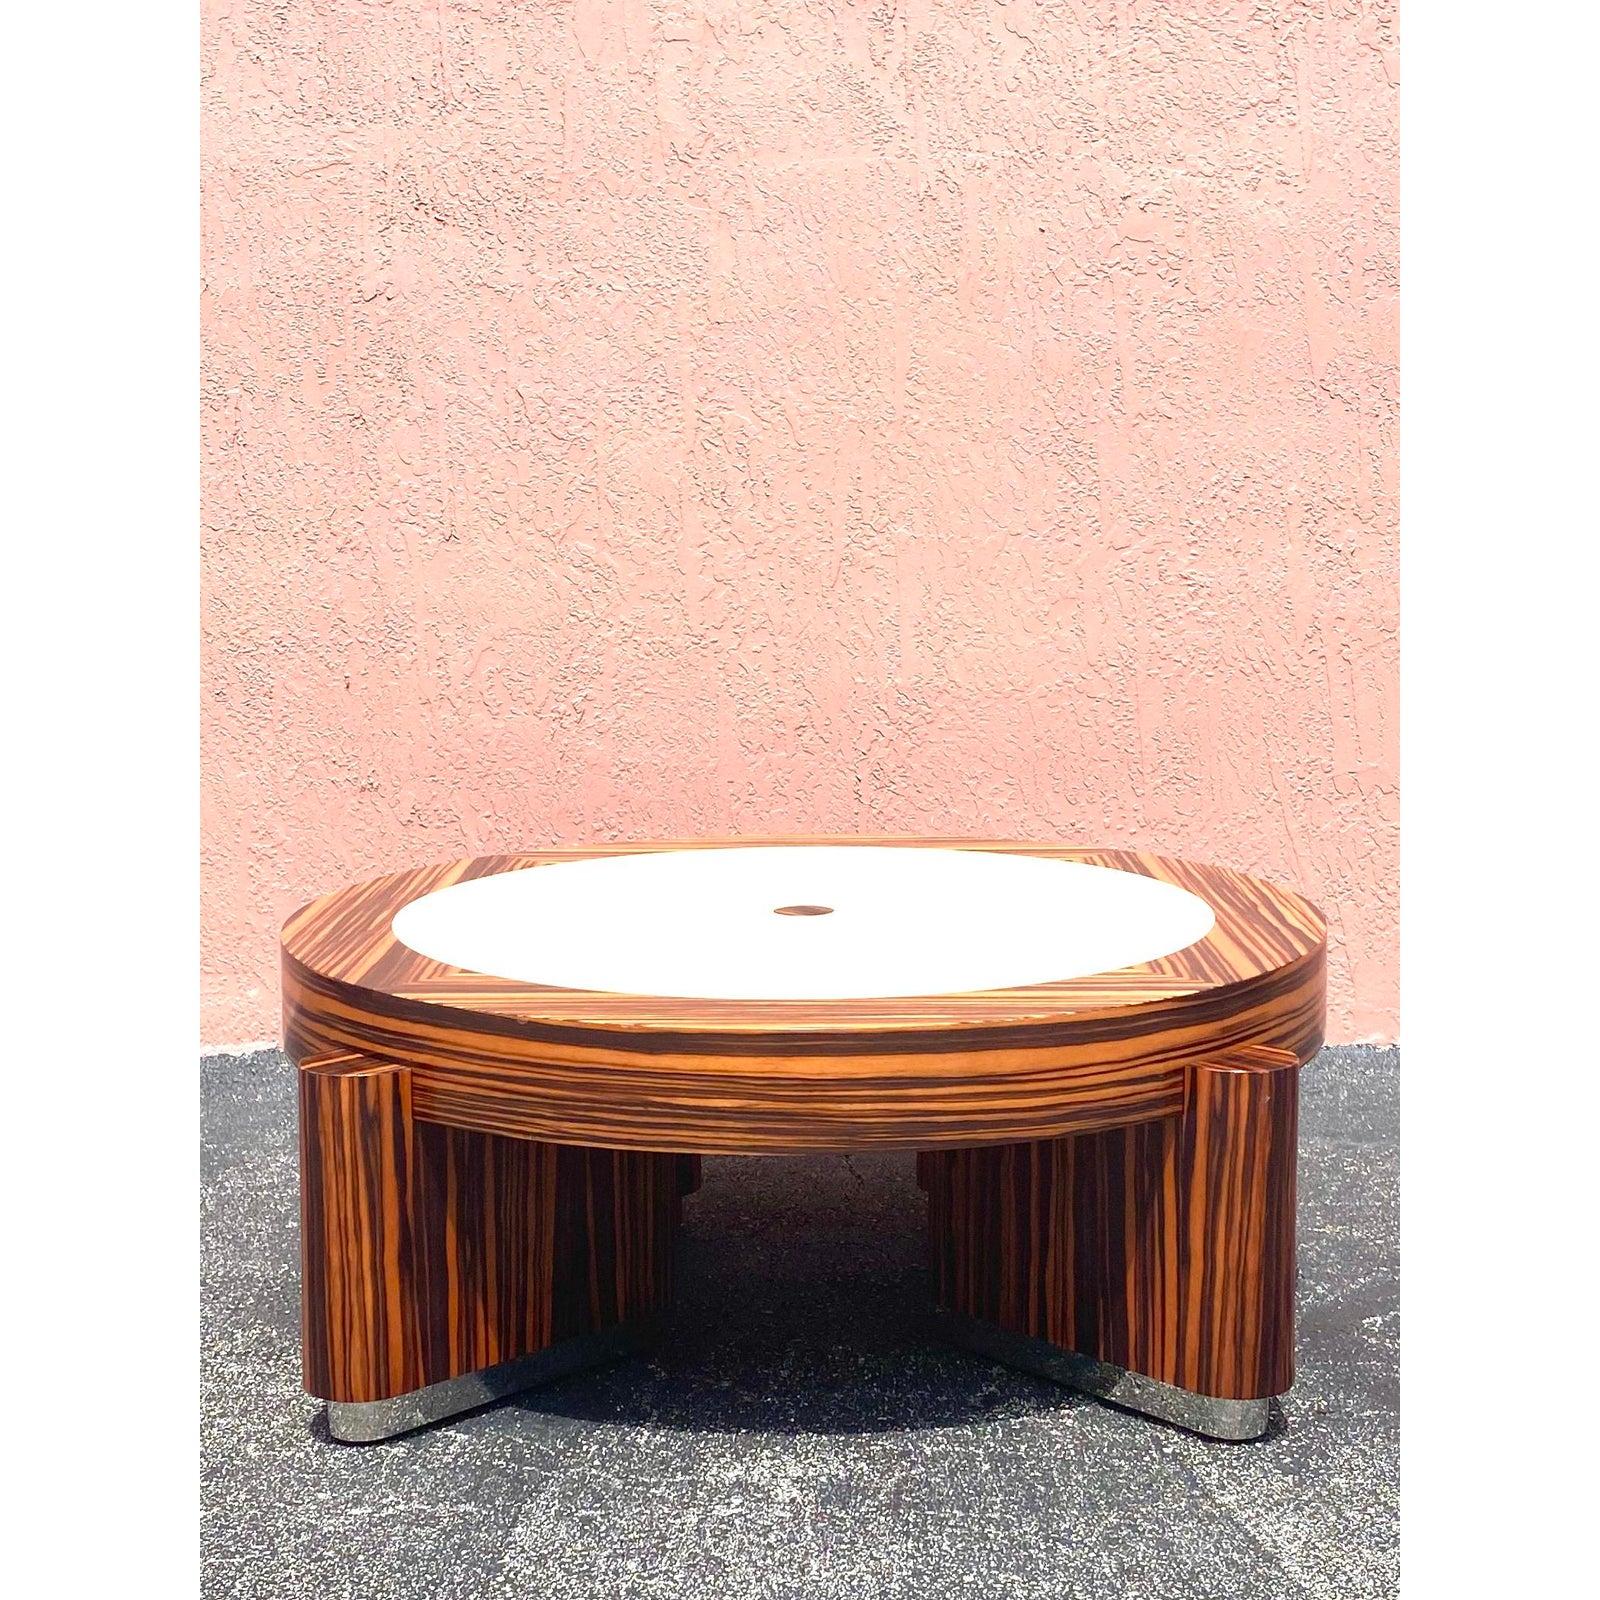 Incredible Contemporary zebra wood and Shagreen coffee table. Round space with thick legs that rest on a chrome plinth. Custom made.